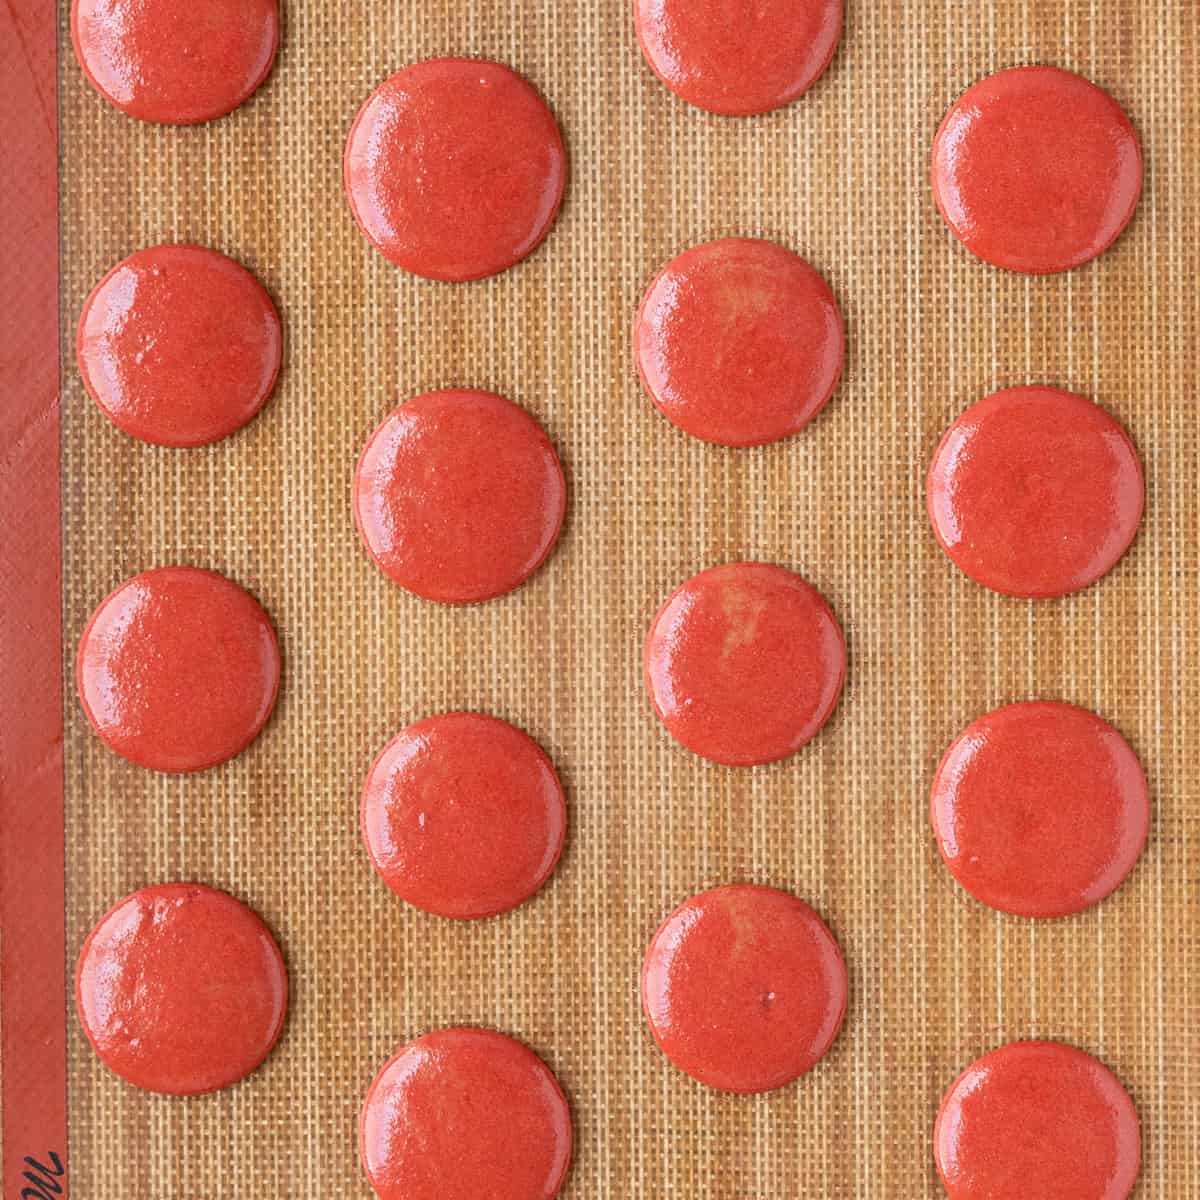 the macarons piped onto a silicone mat